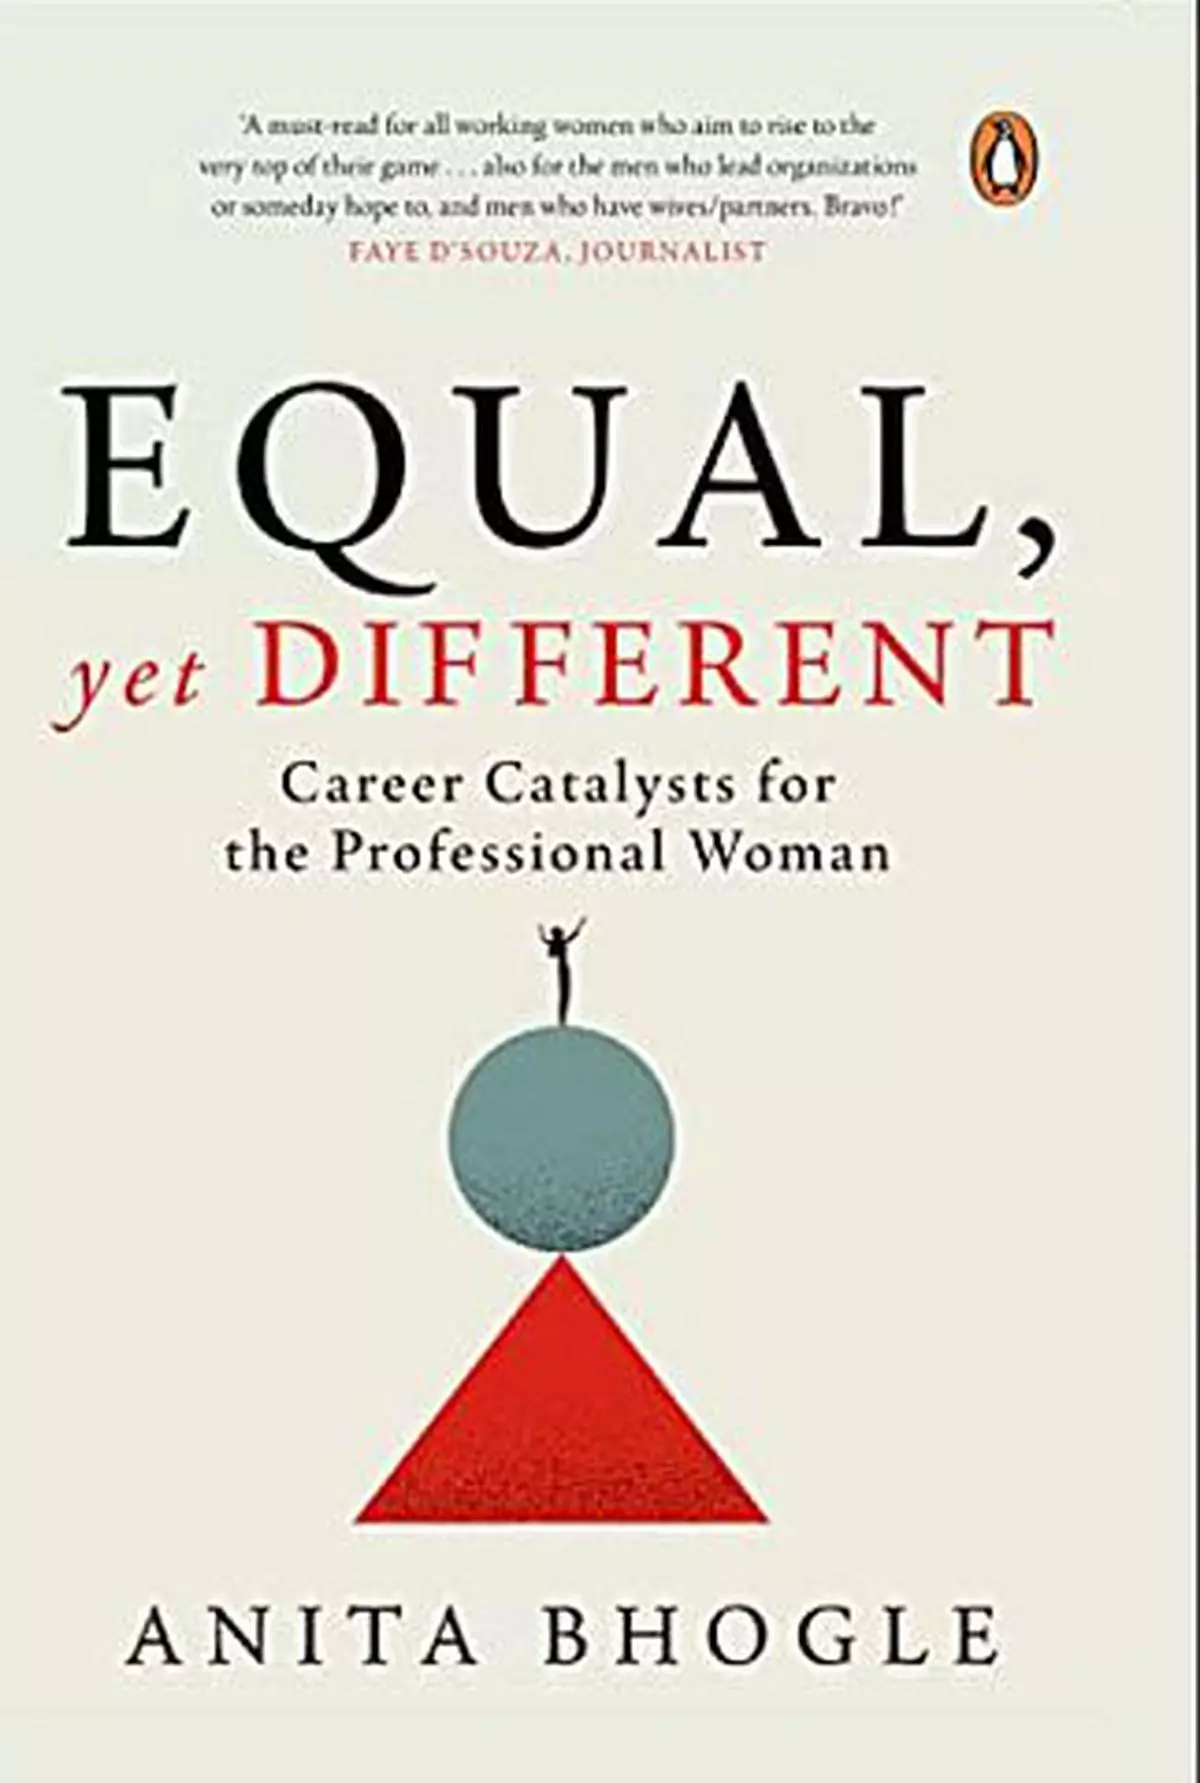 Equal Yet Different: Career Catalysts for the Professional Women
Anita Bhogle
FSC/ Penguin
Rs 399/ 211 pages